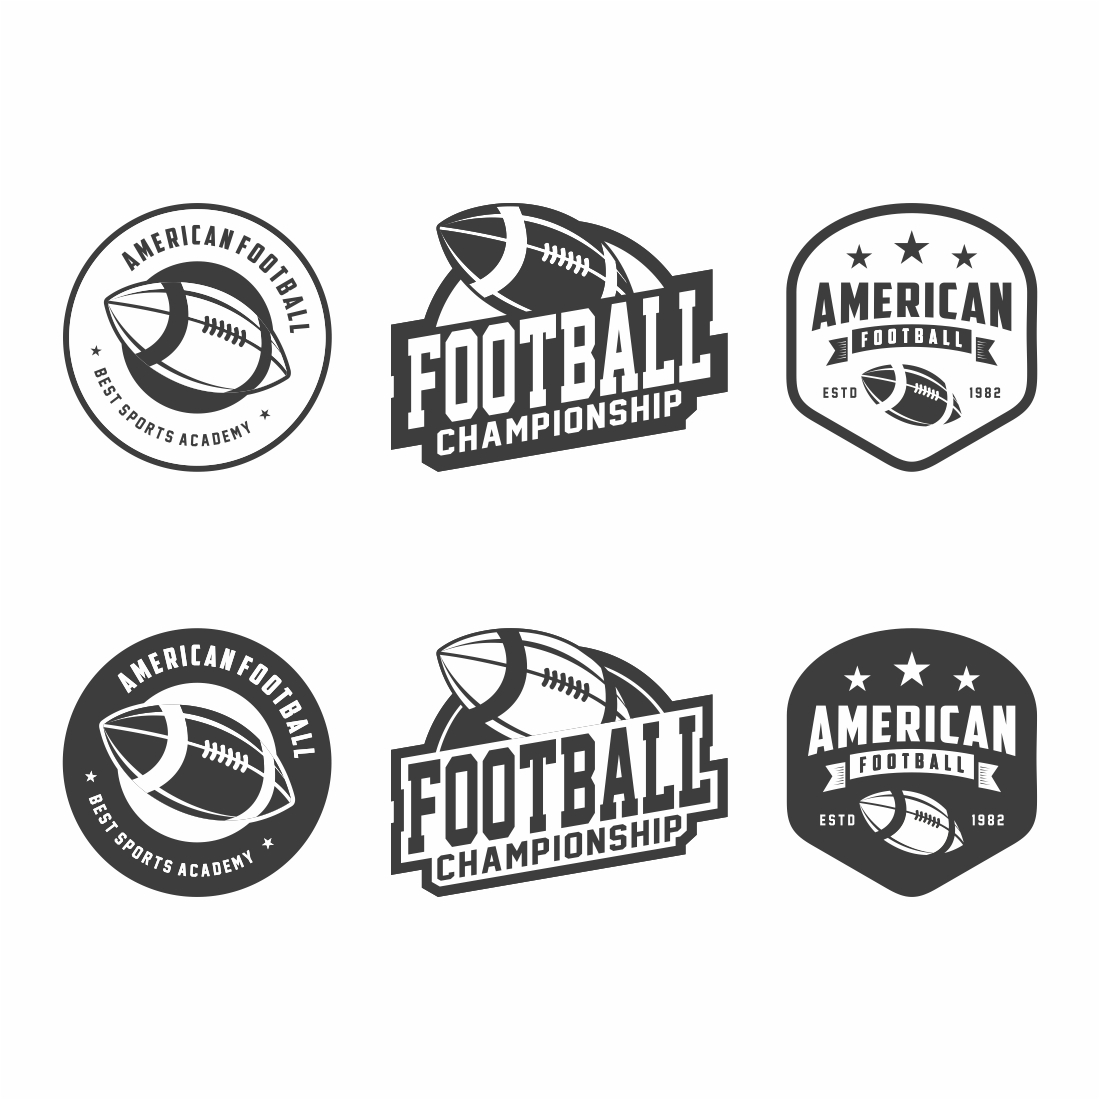 American Football logo, emblem set collection, design template on light background – Only $9 cover image.